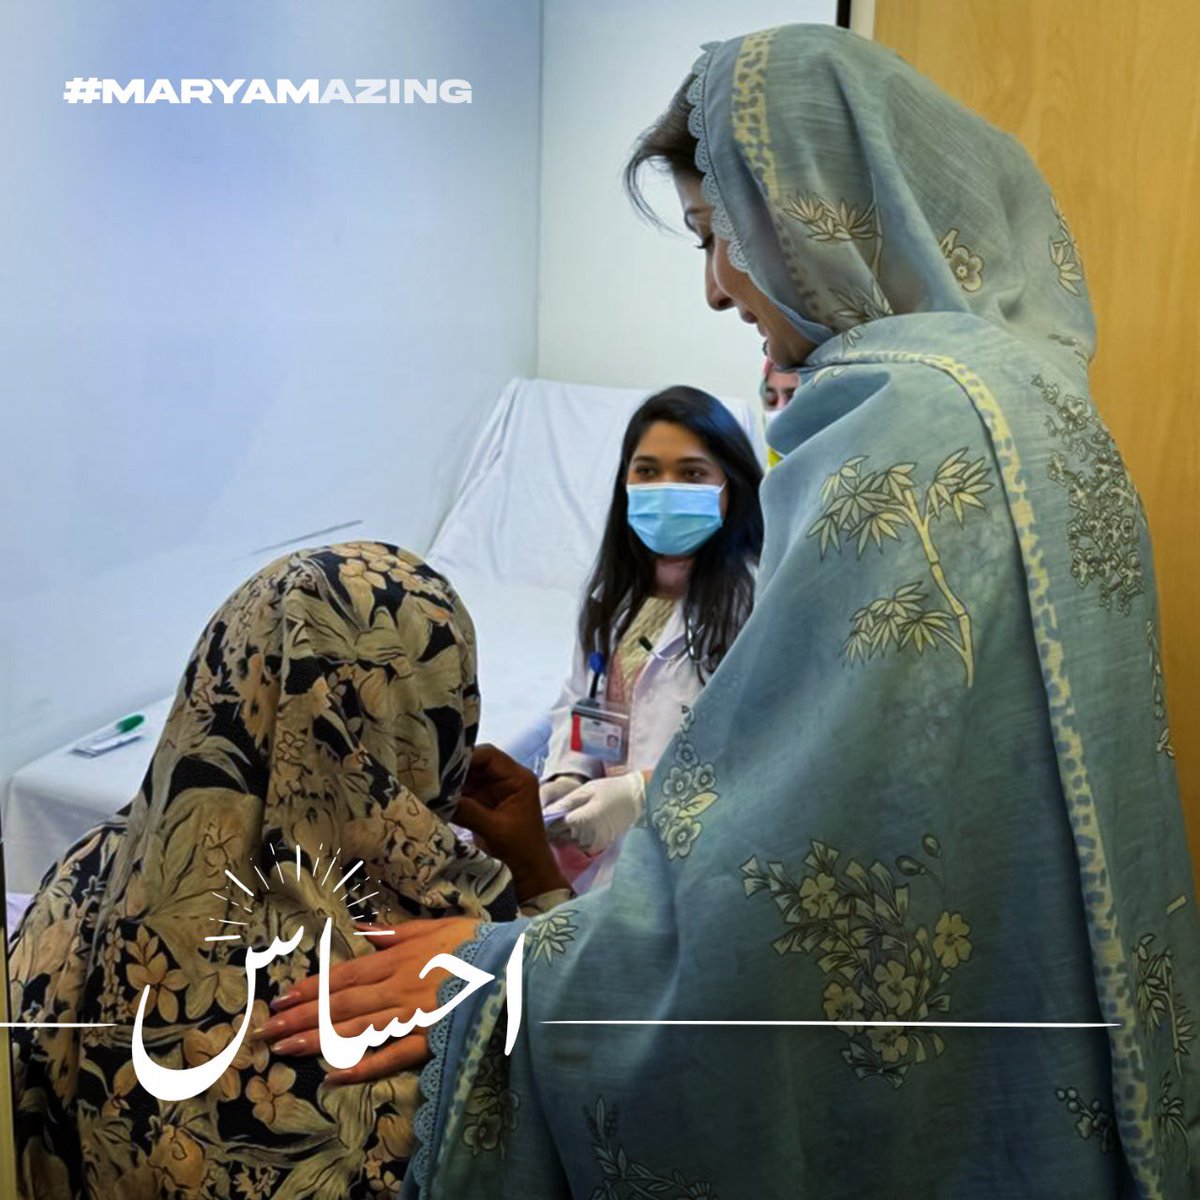 Everyday Chief Minister Mam Maryam Nawaz bringing new initiatives for the Health sector